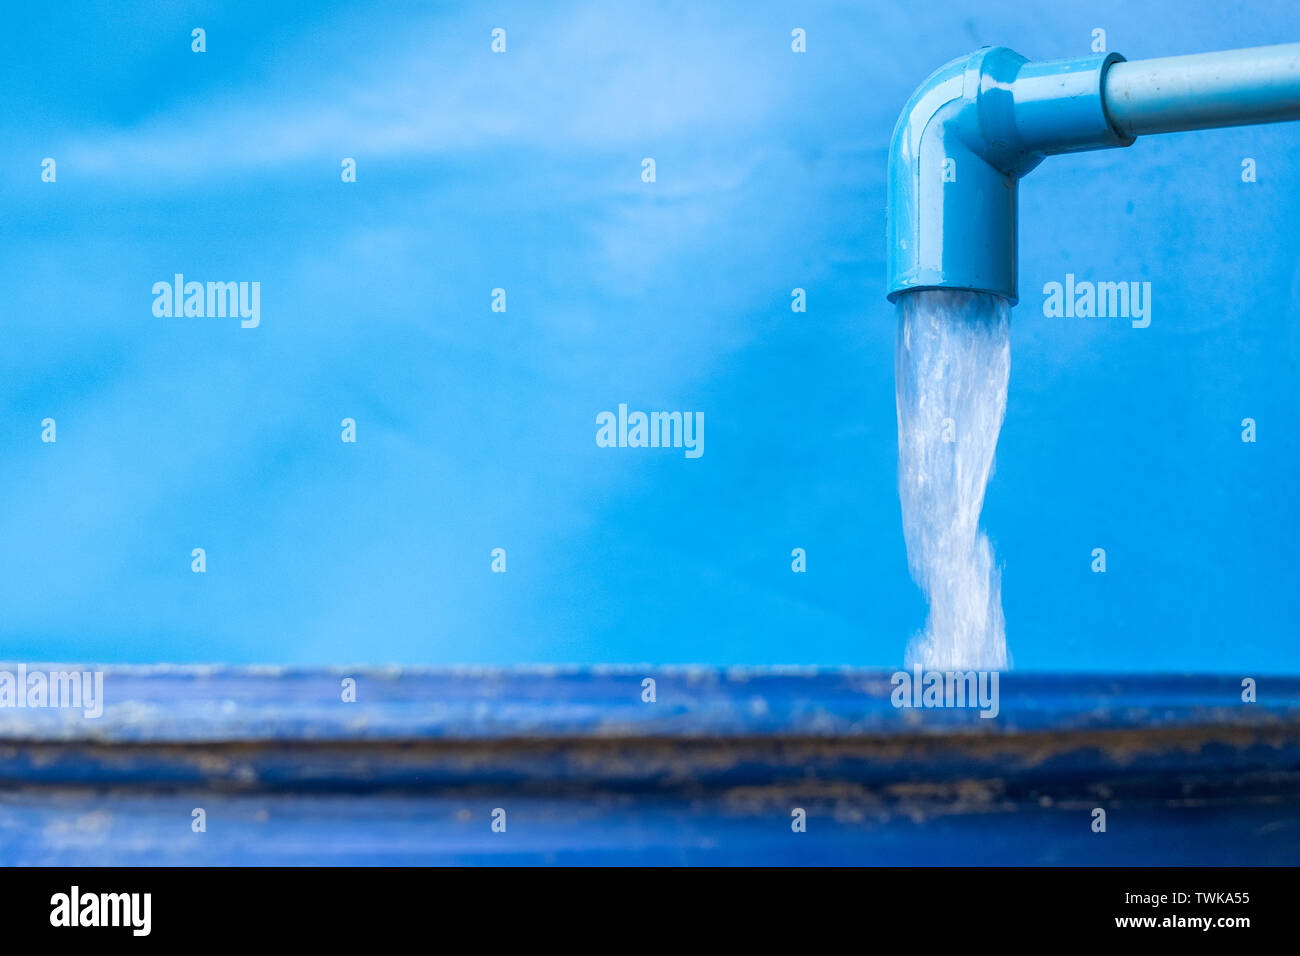 Blue pvc pipe with flowing water in bucket from groundwater Stock Photo